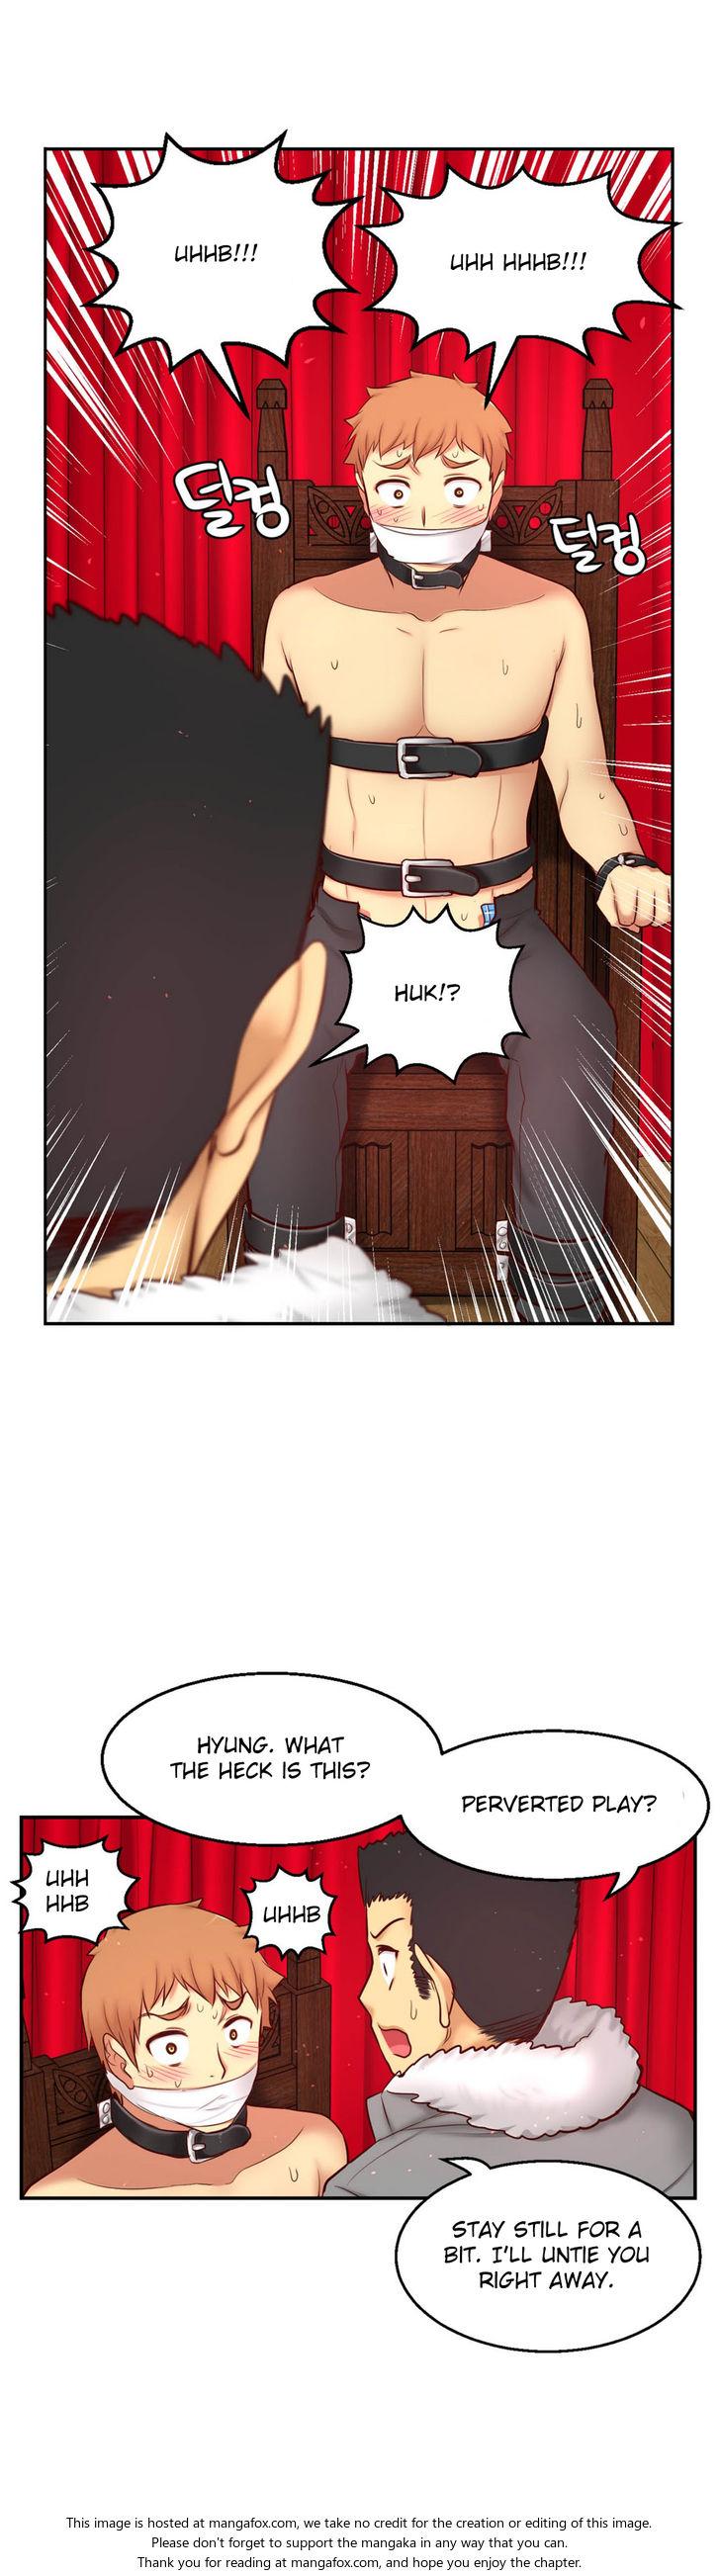 [Donggul Gom] She is Young (English) Part 1/2 1755